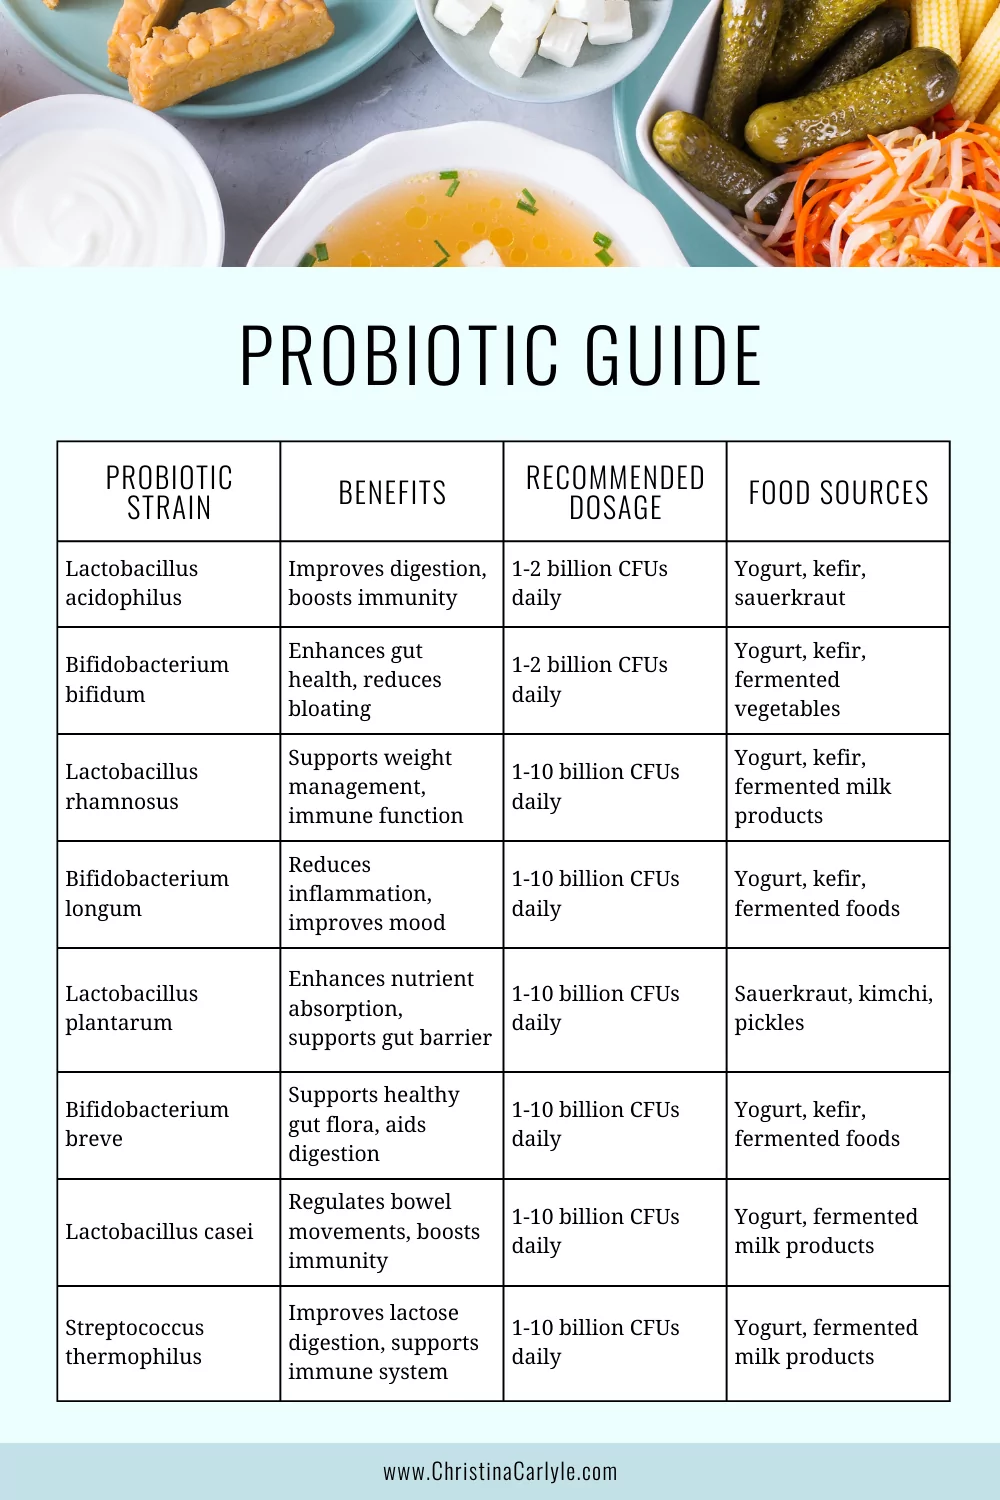 a chart comparing different probiotic strains, their benefits, recommended dosage, and food sources